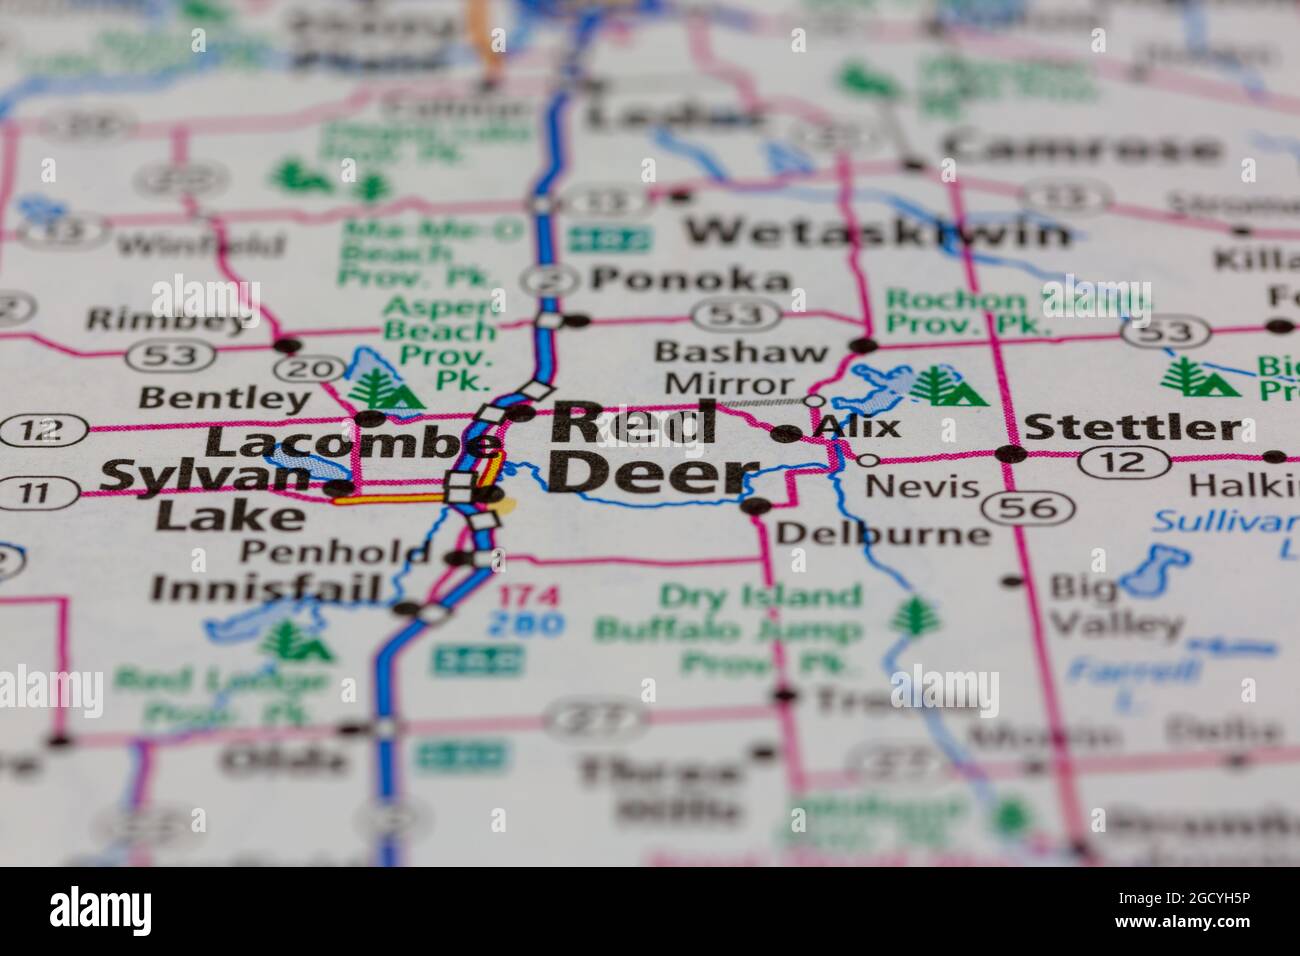 Red Deer Alberta Canada shown on a road map or Geography map Stock Photo